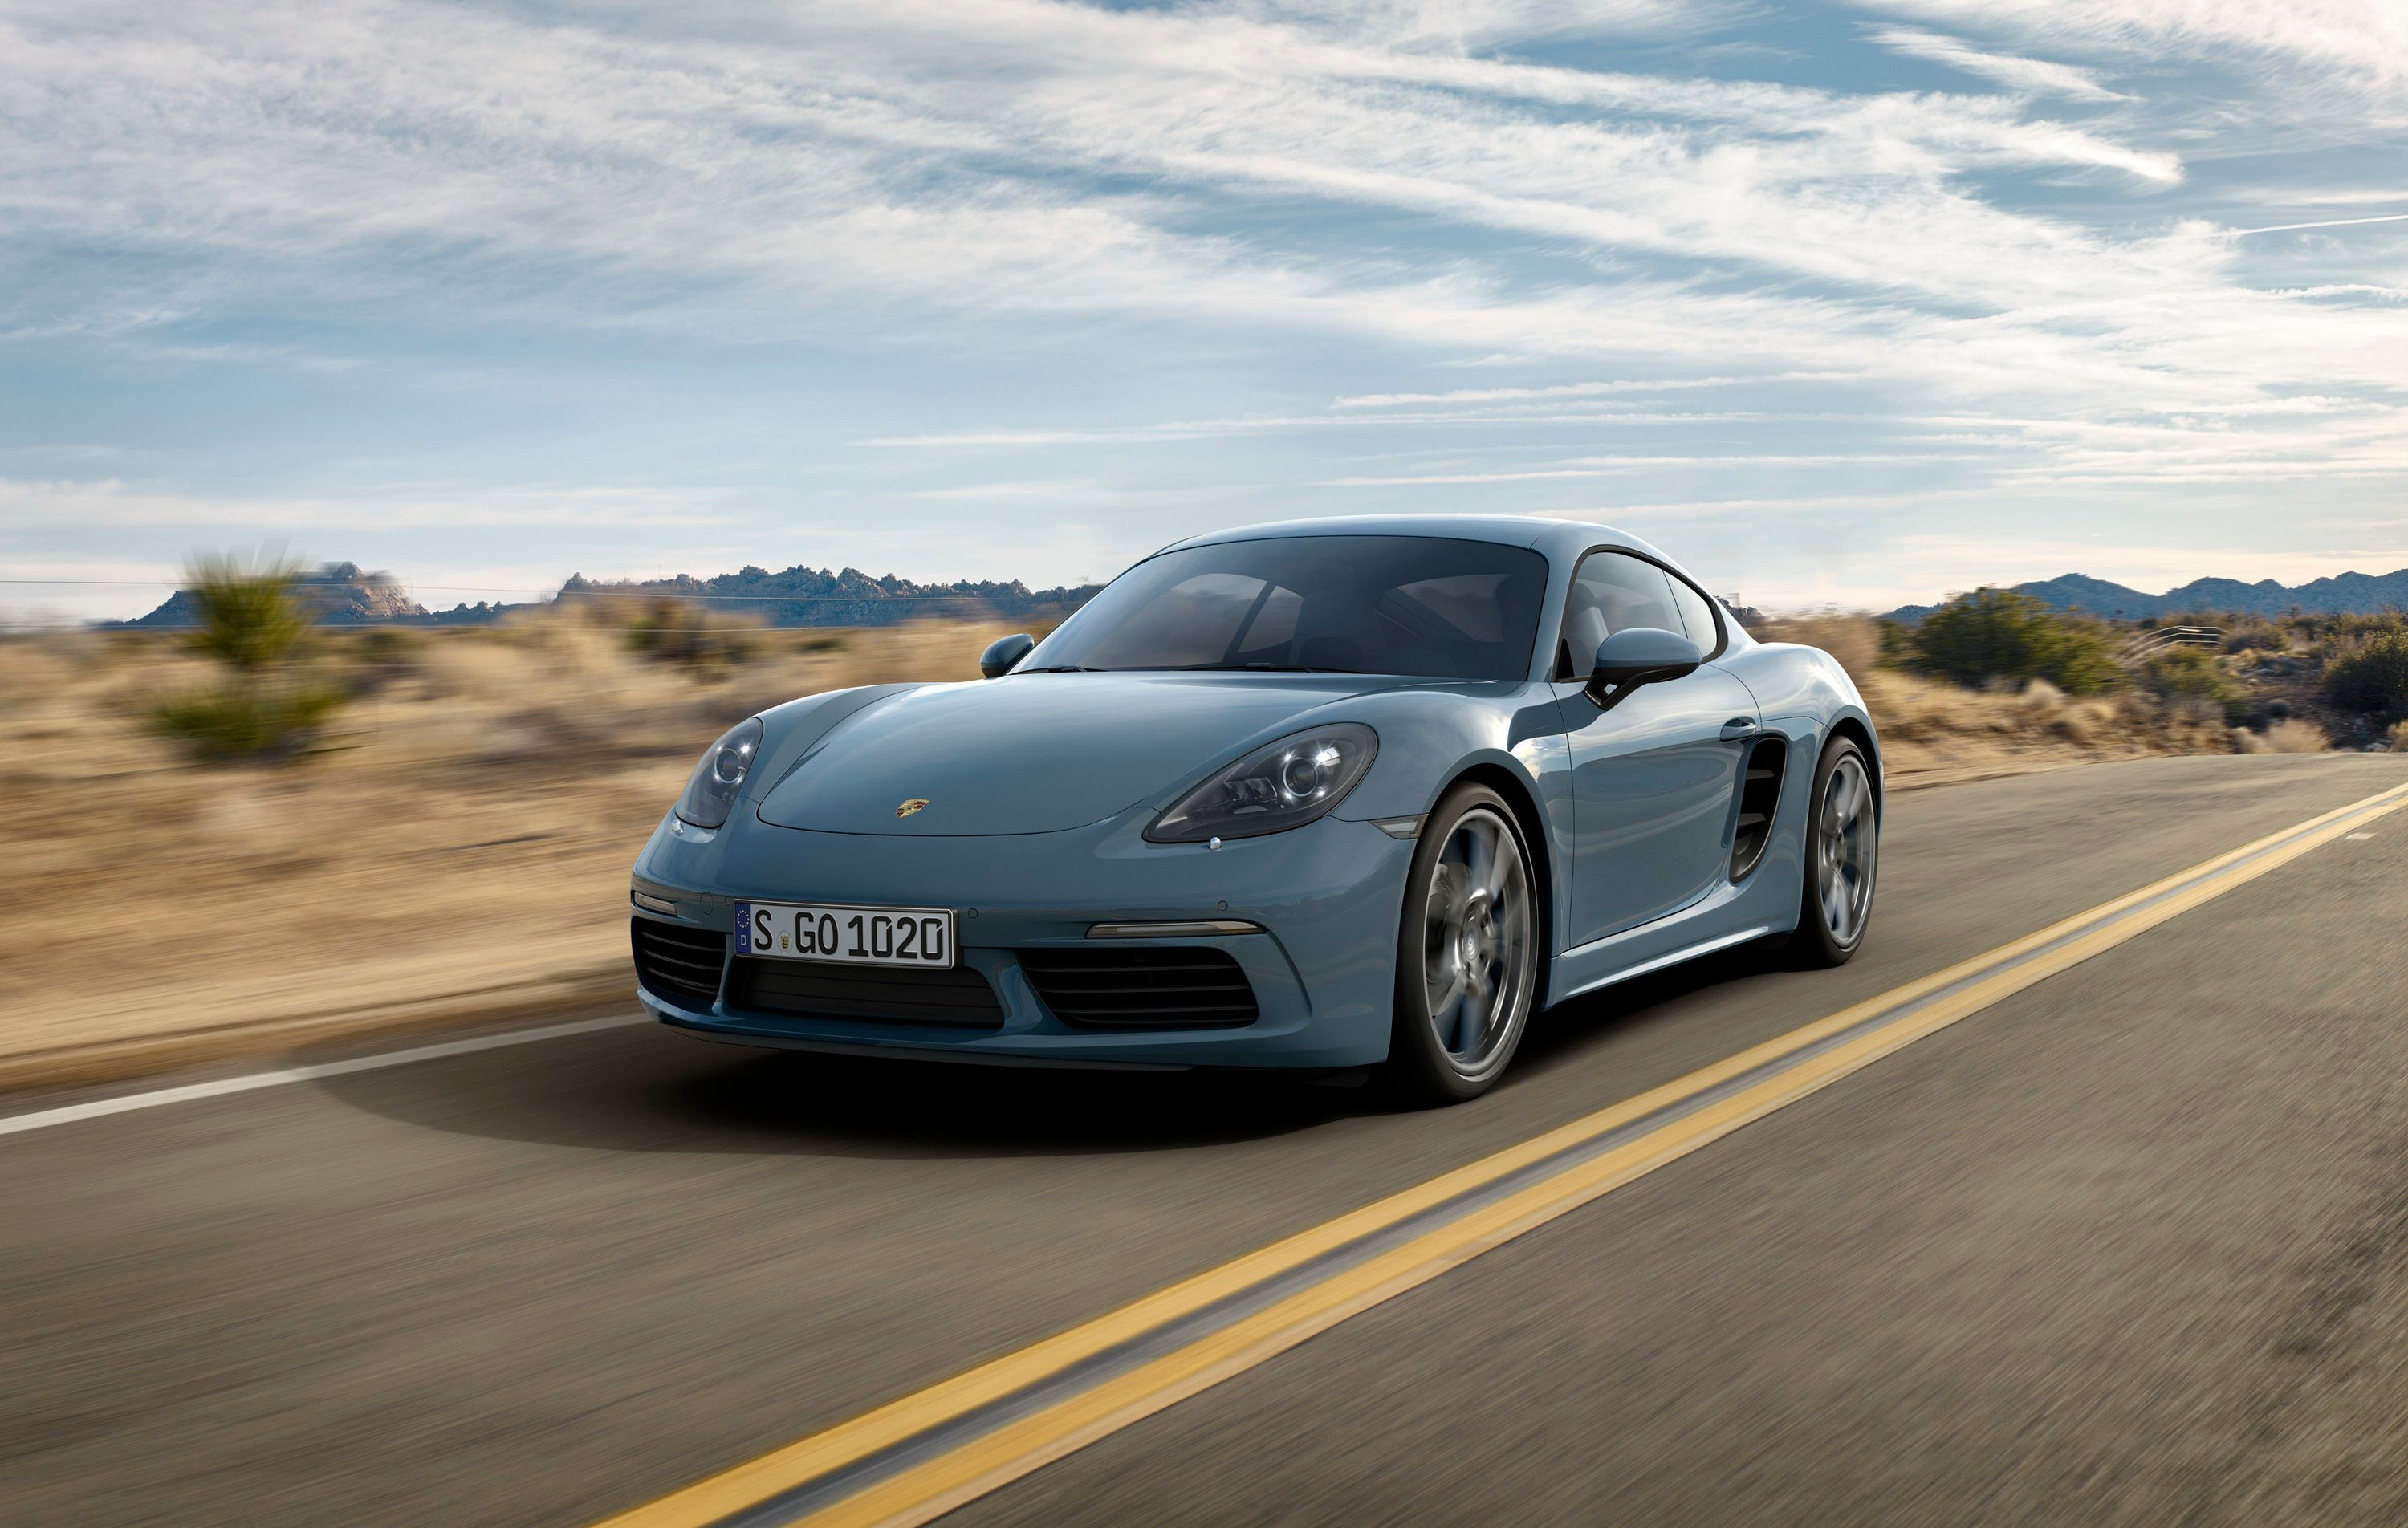 2020 - 2021 The Next-Gen Porsche 718 Cayman Might be All-Electric - Could This Lead to an Electric Toyota MR2 Spinoff?